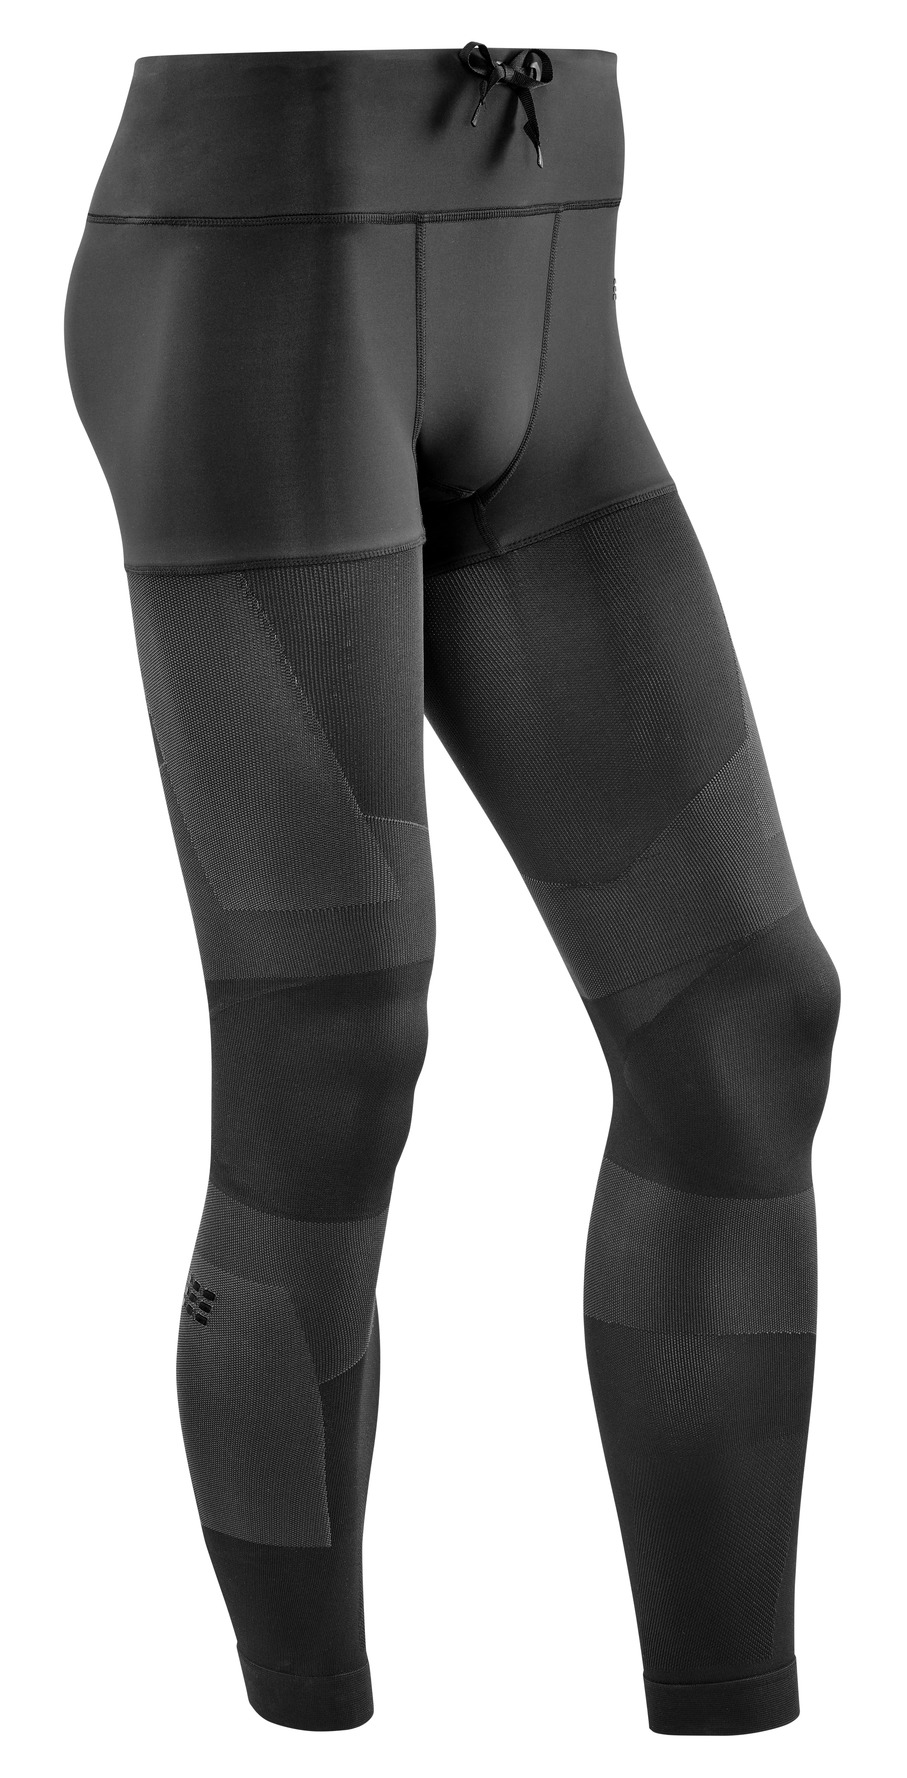 CEP Launches the NEW Compression Tights & Shorts 4.0